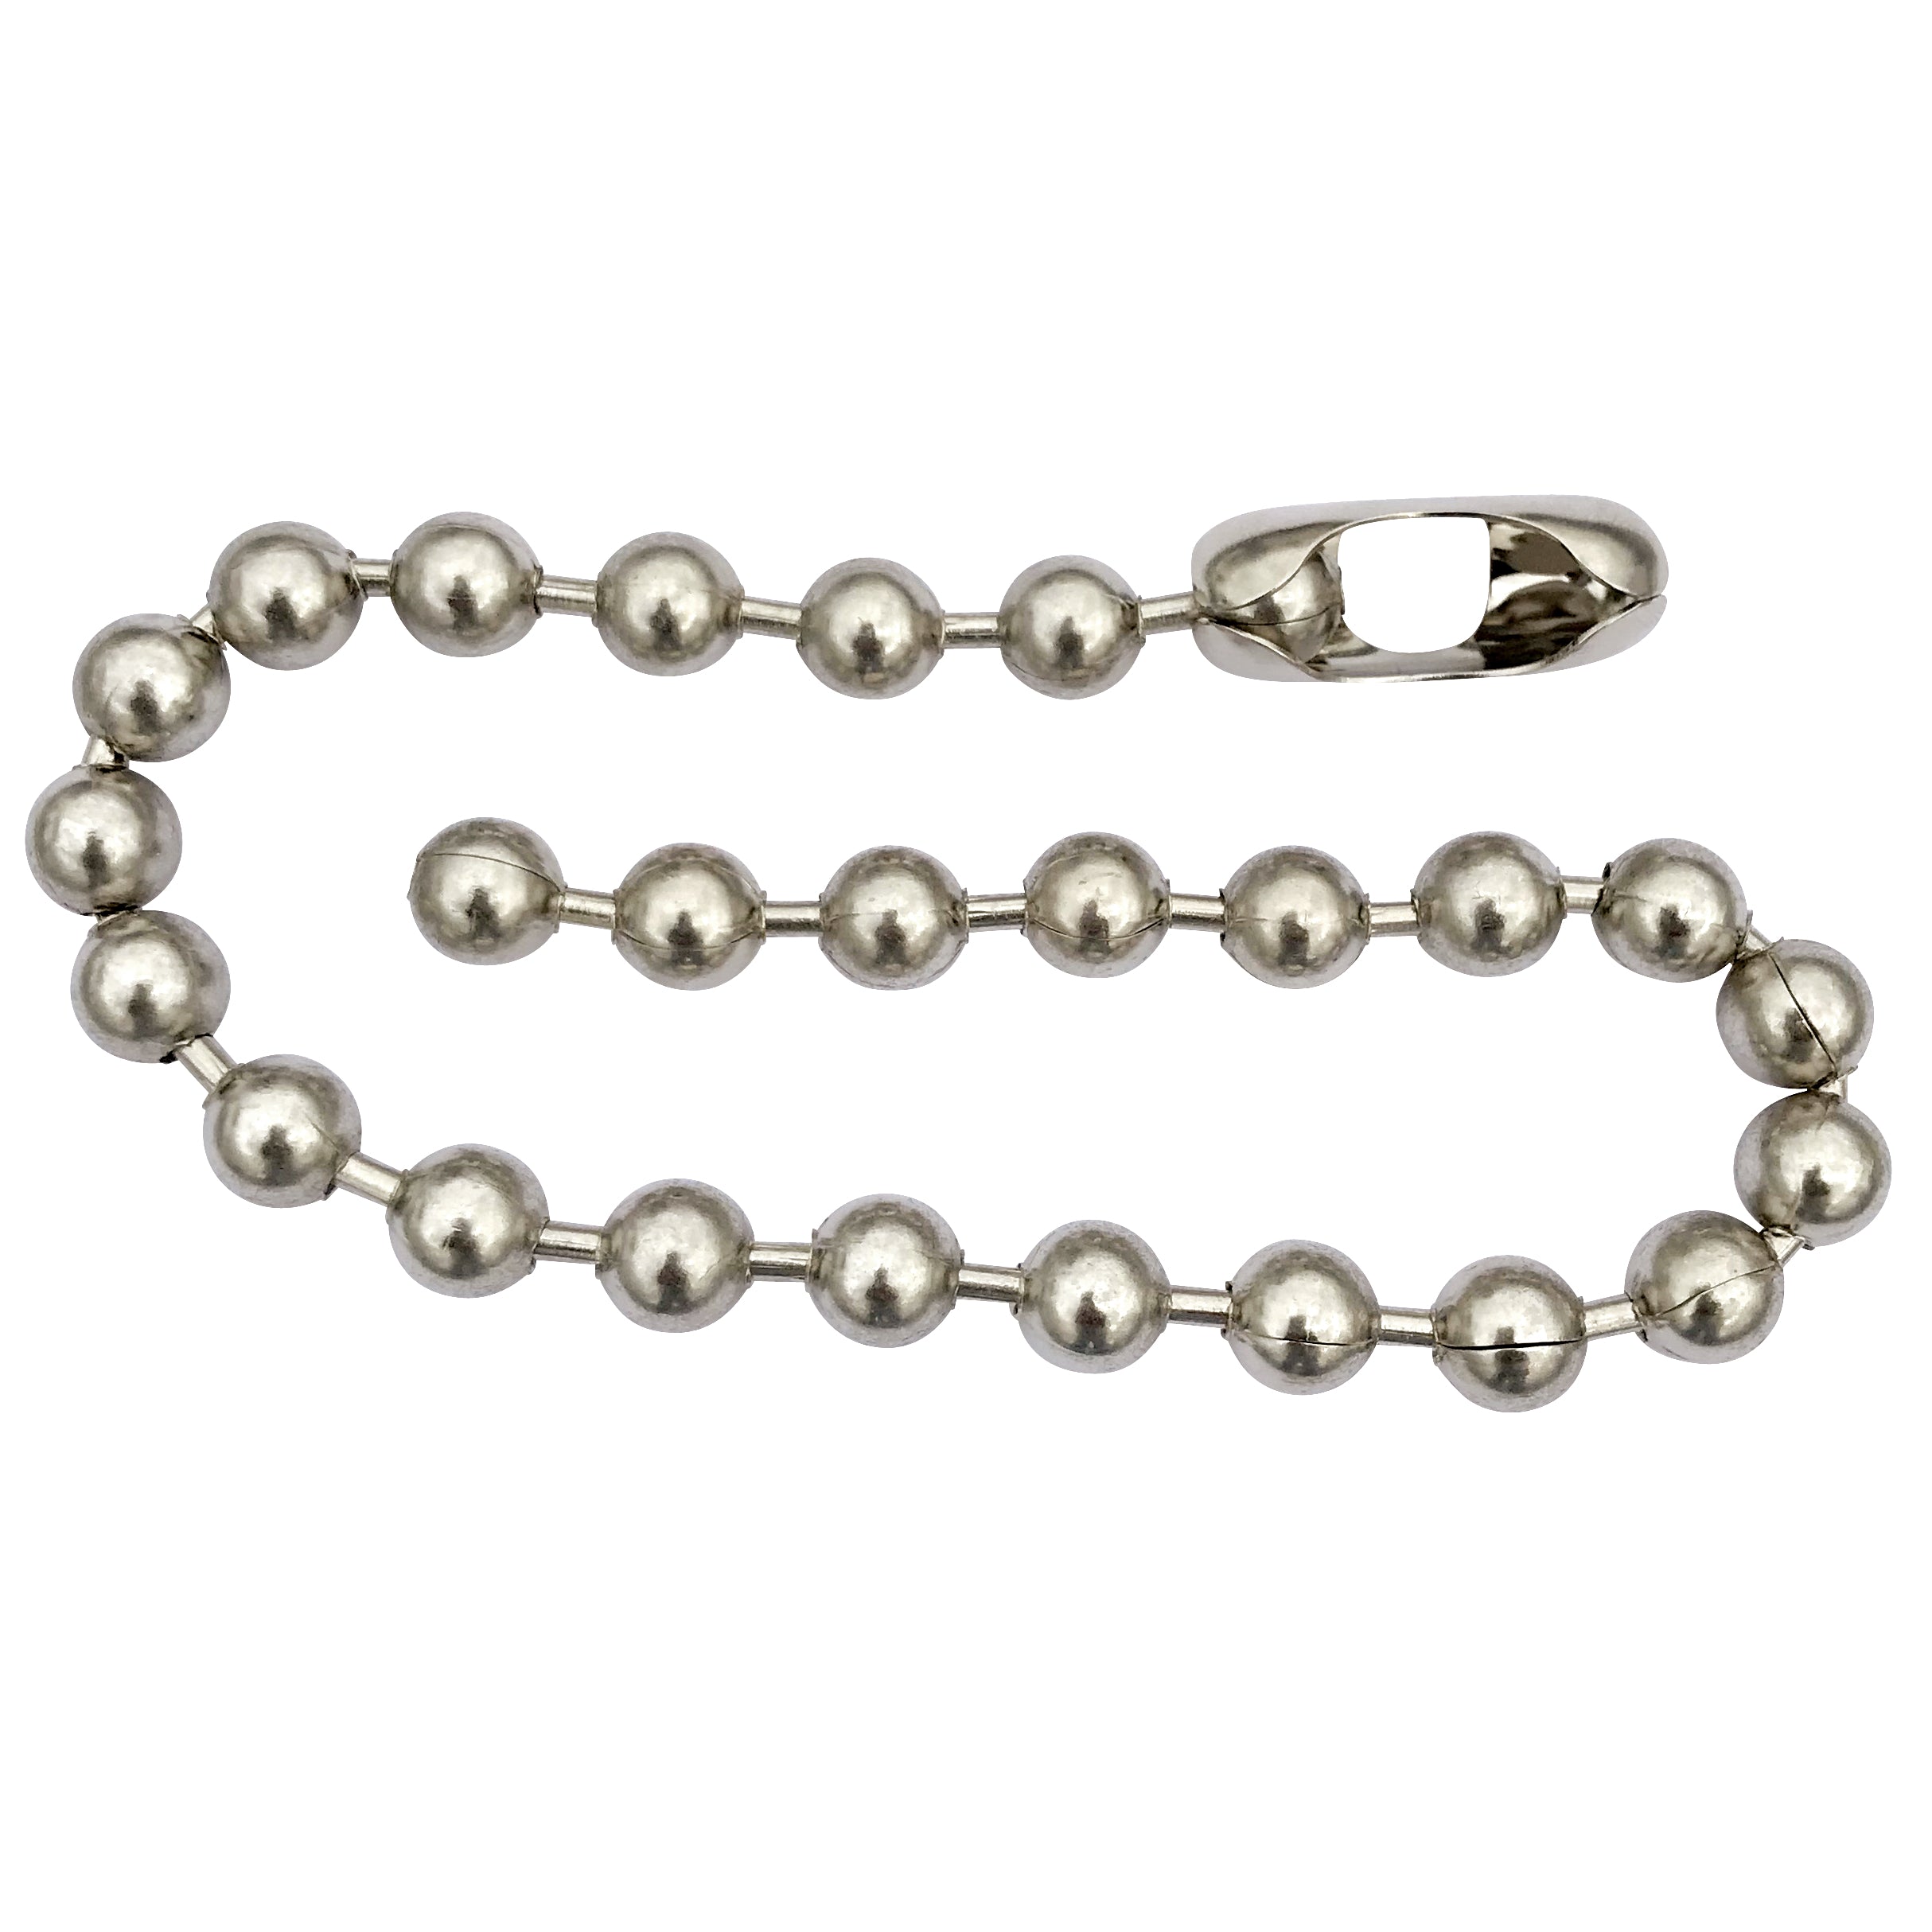 Silver Ball Chain for Necklaces - 26 inch Beaded Jewelry